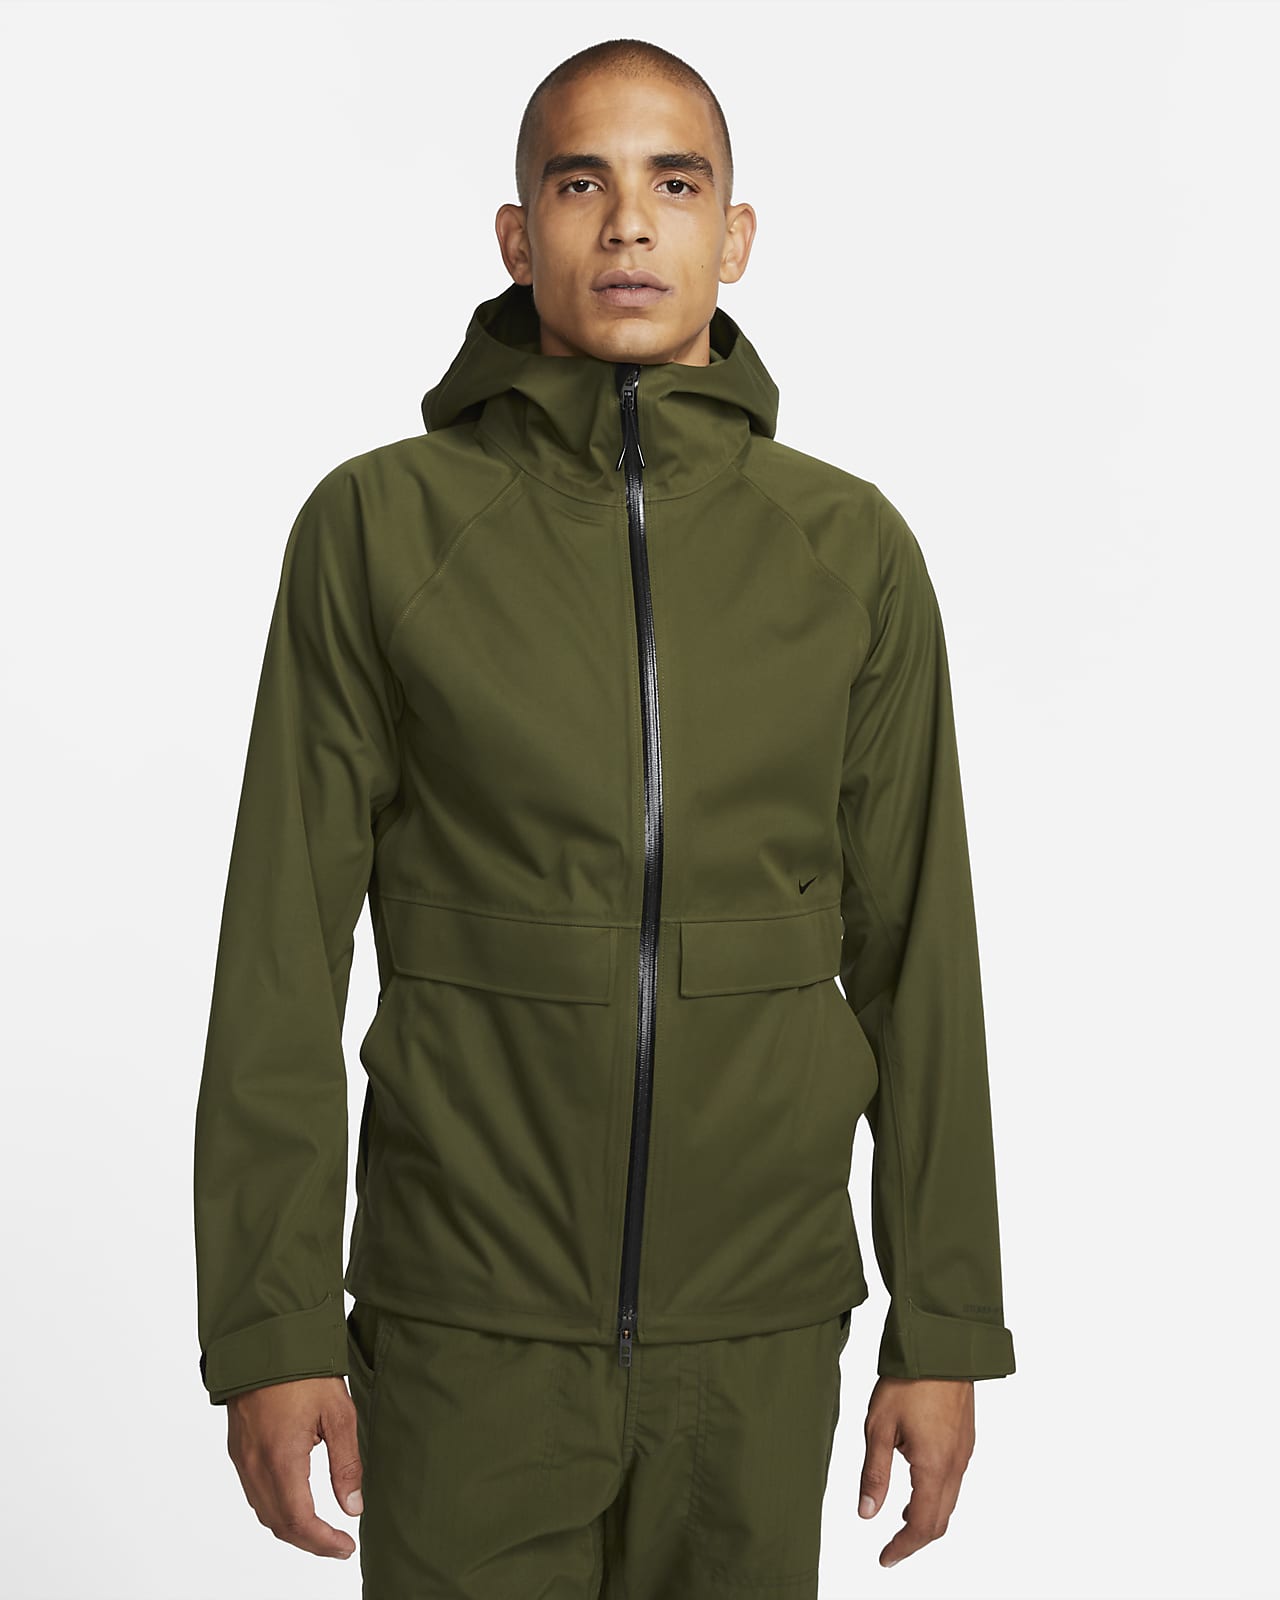 Nike Storm-FIT ADV A.P.S. Men's Fitness Jacket